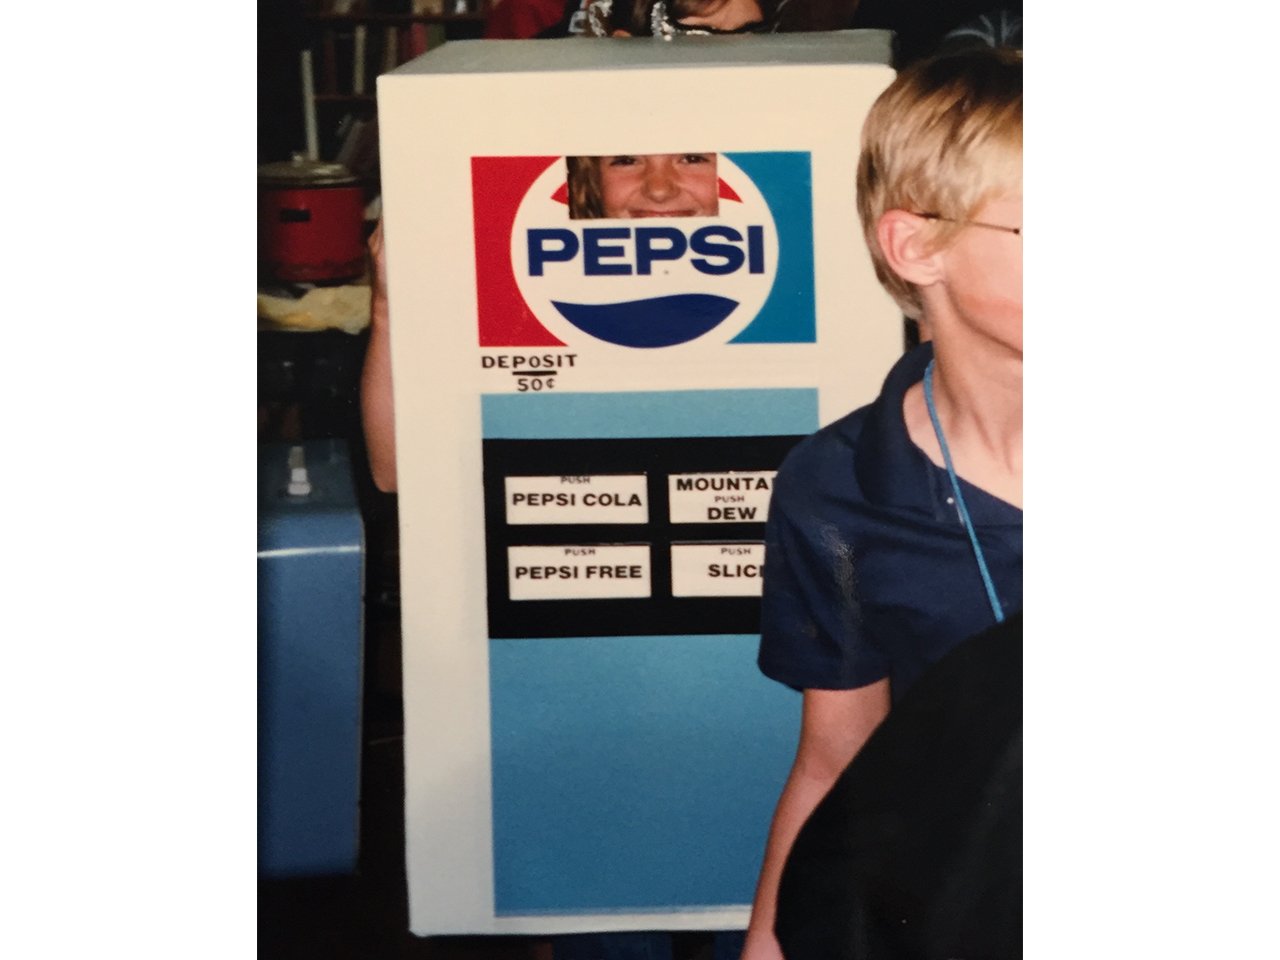 Young girl dressed as Pepsi vending machine